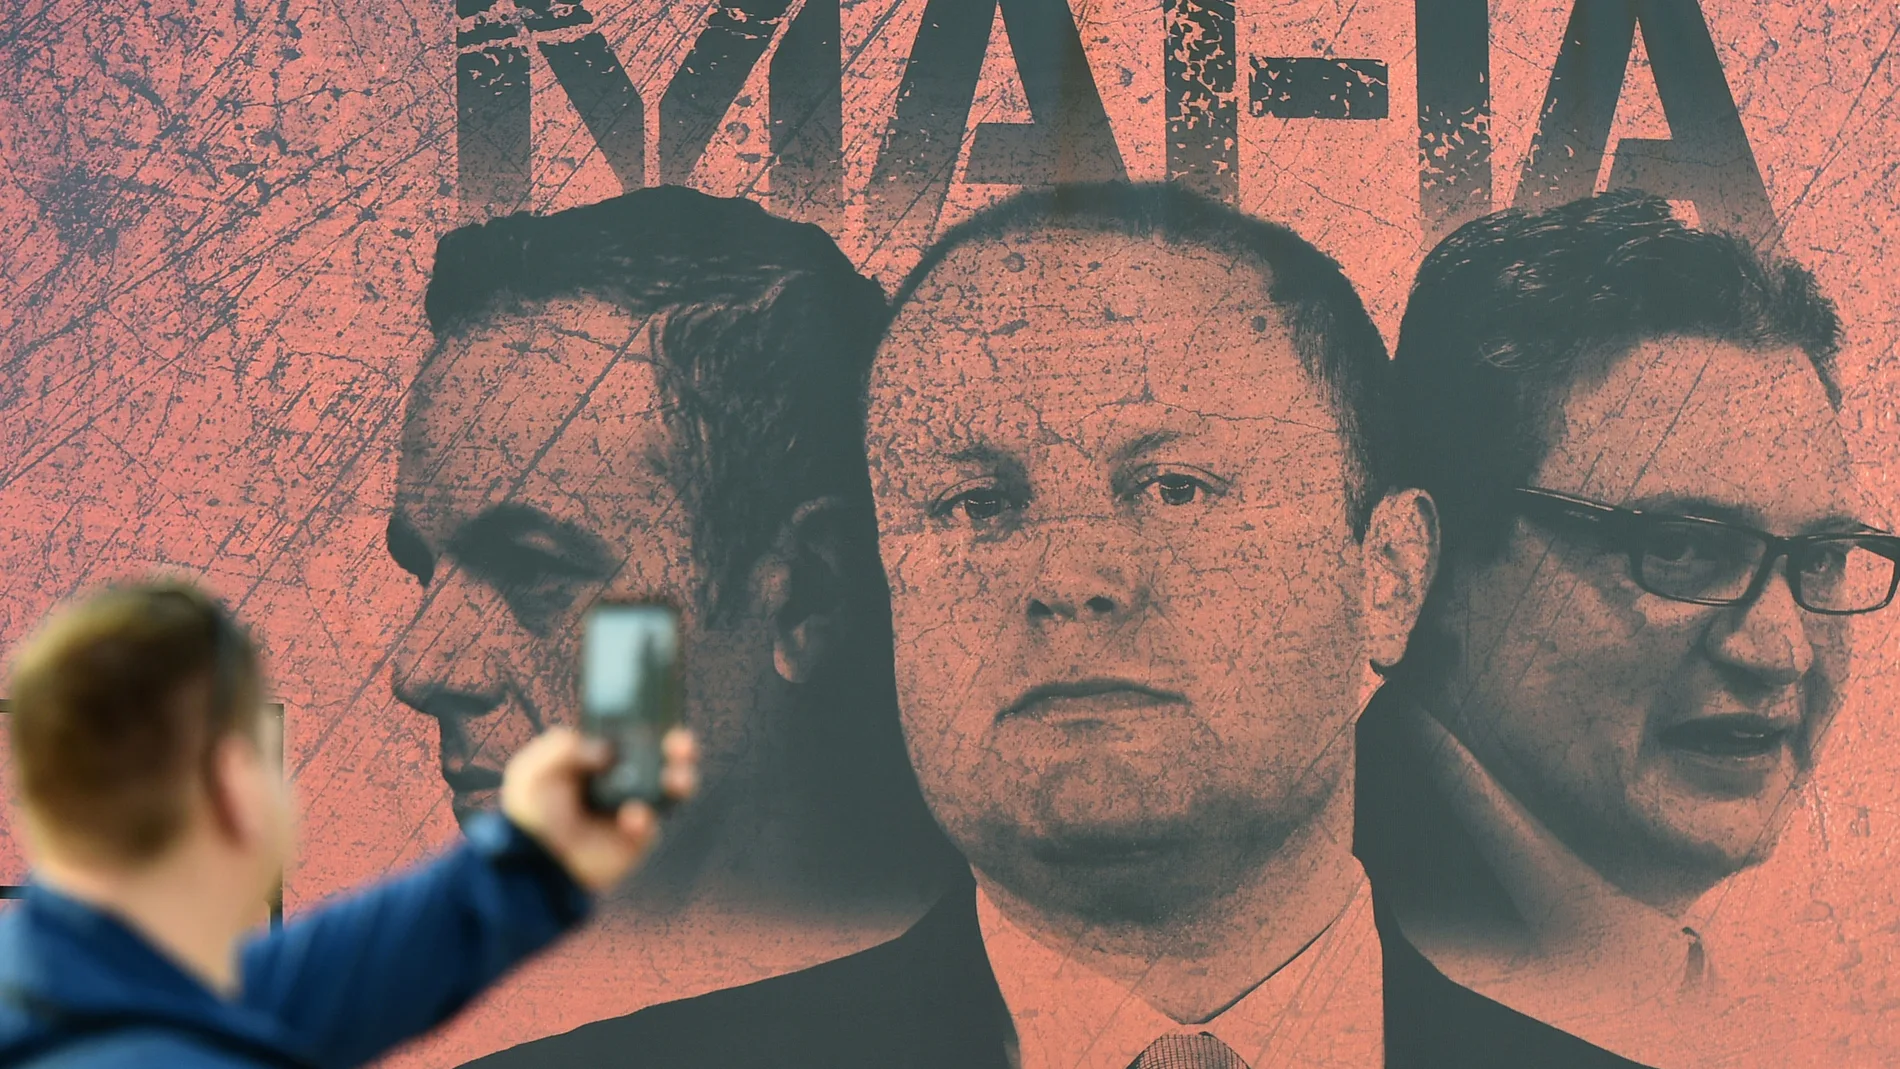 A man takes a photograph of a poster showing Malta's Prime Minister Joseph Muscat, Chief of Staff Keith Schembri and Minister for Tourism Konrad Mizzi, ahead of an anti-government protest outside Maltese Prime Minister's office in Valletta